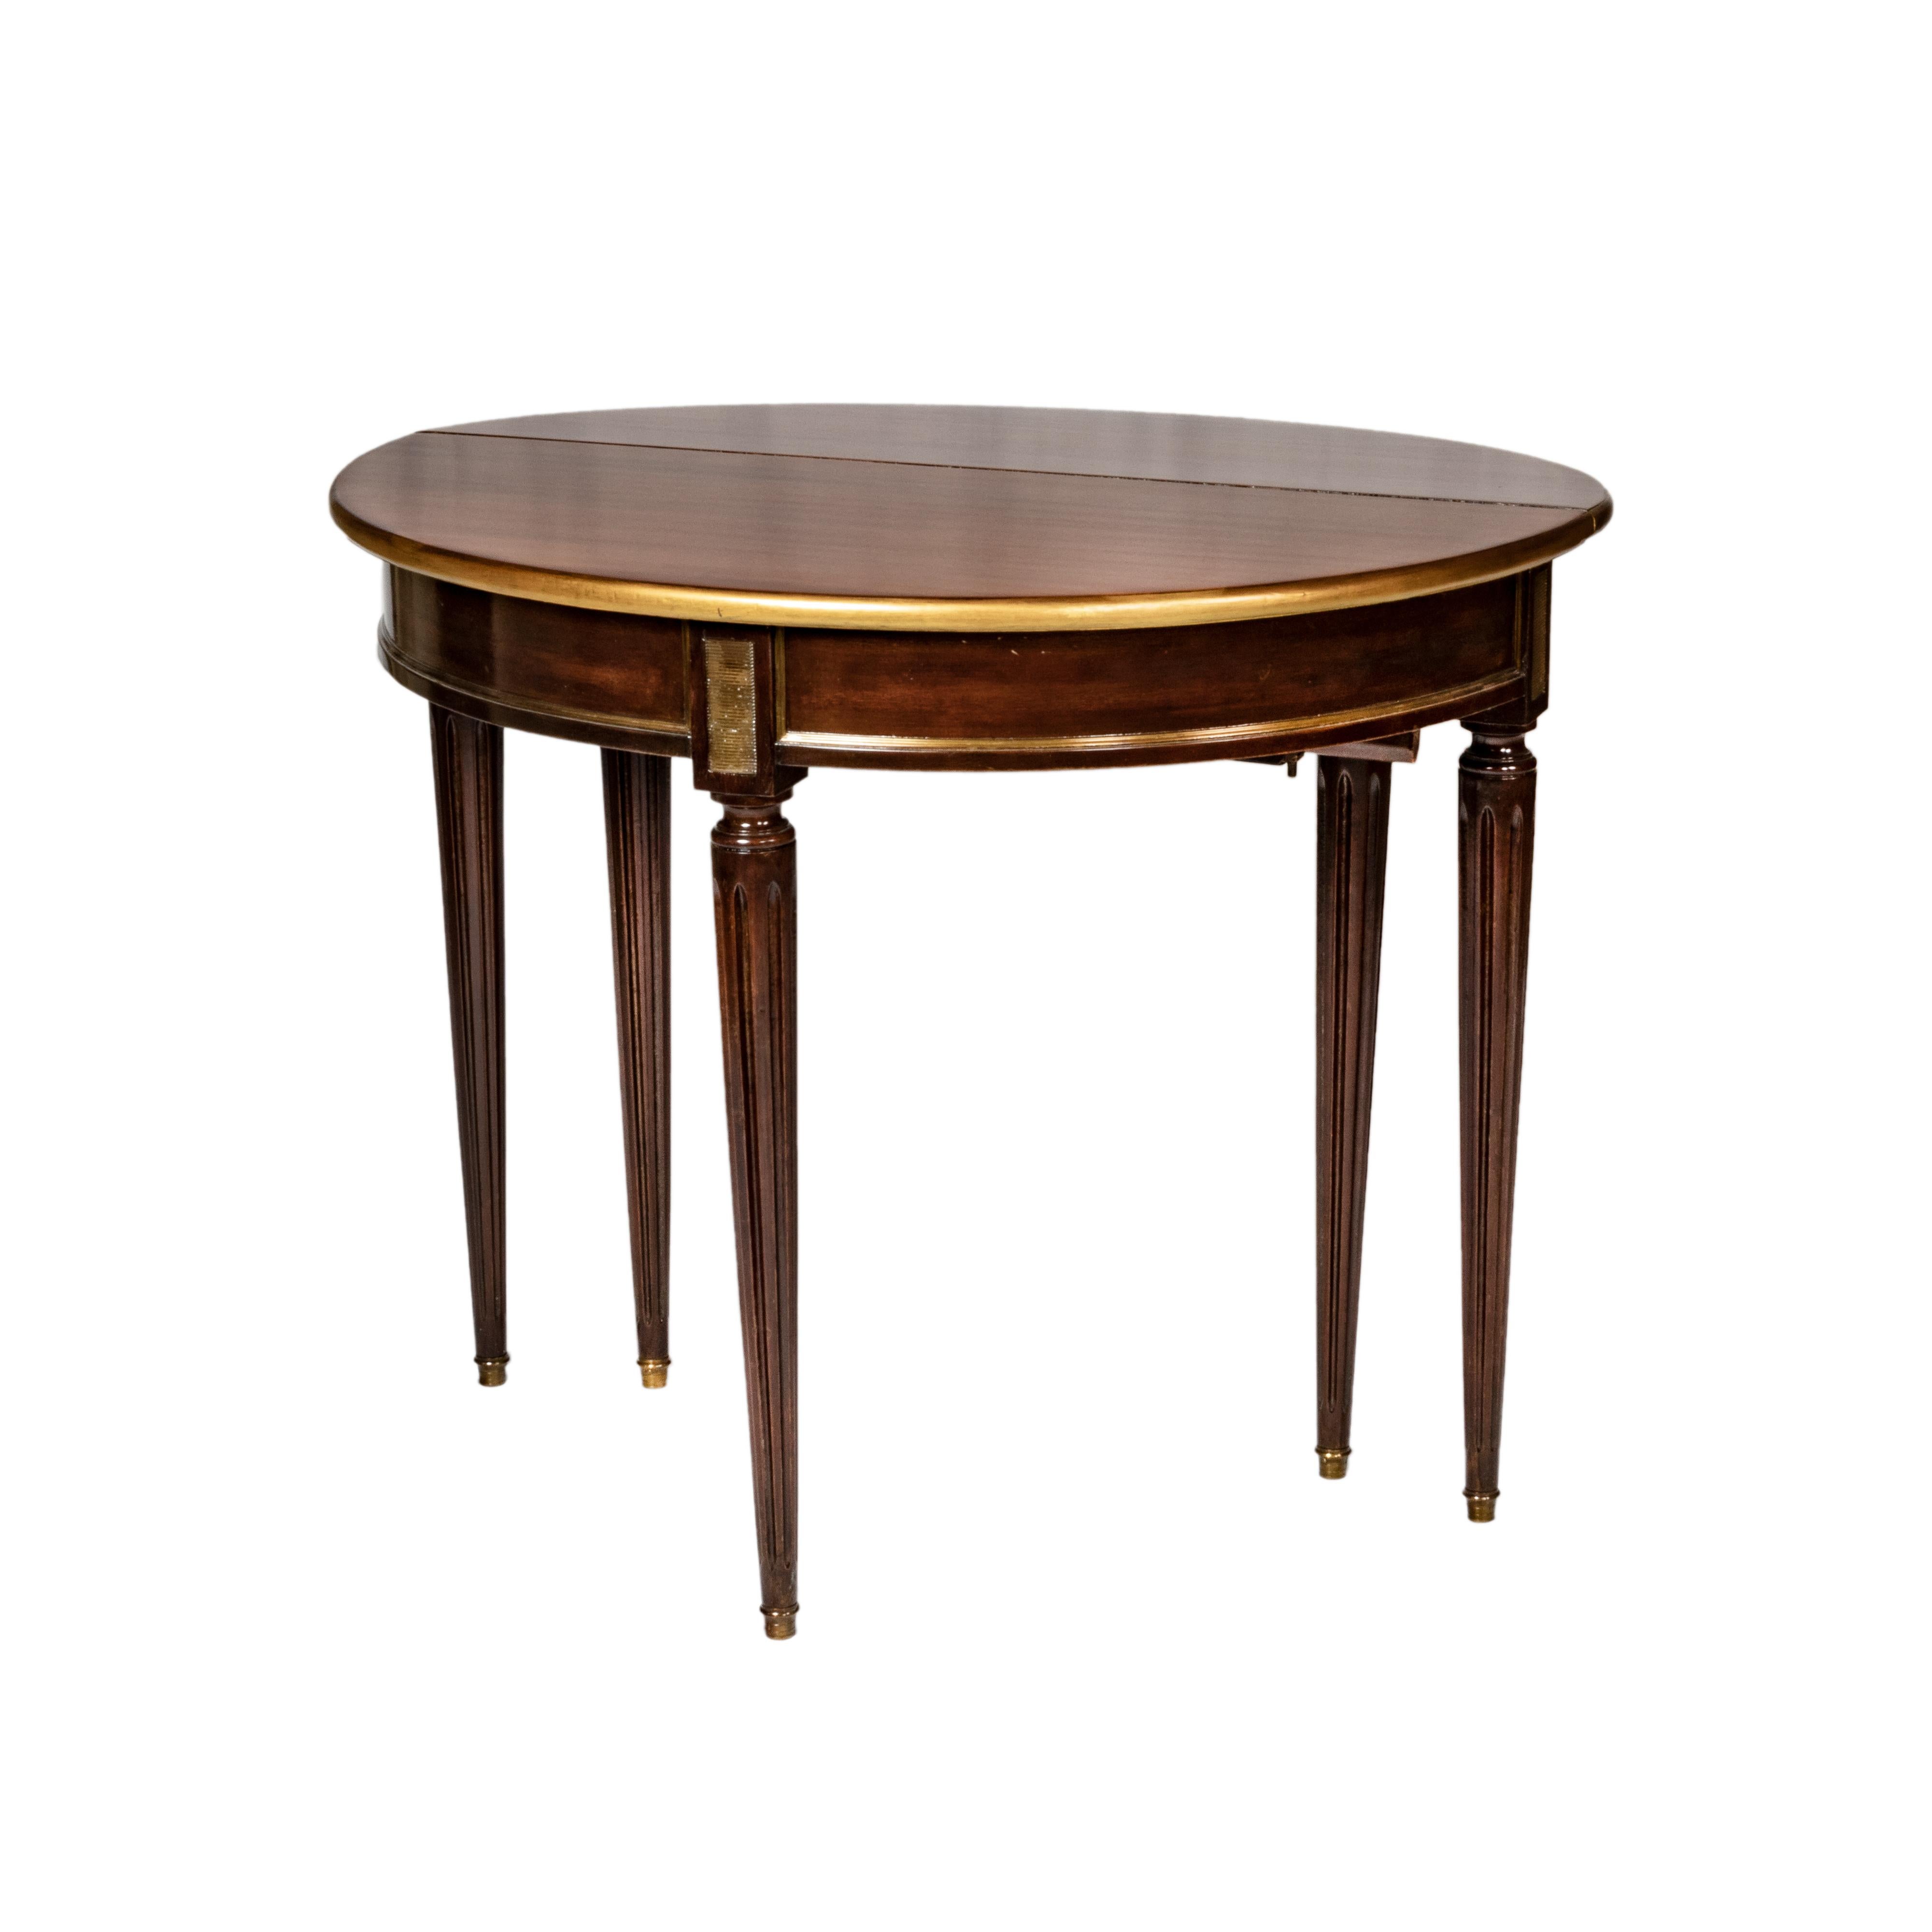 Cast Maison Jansen Directoire Style Dining Room Table For Sale